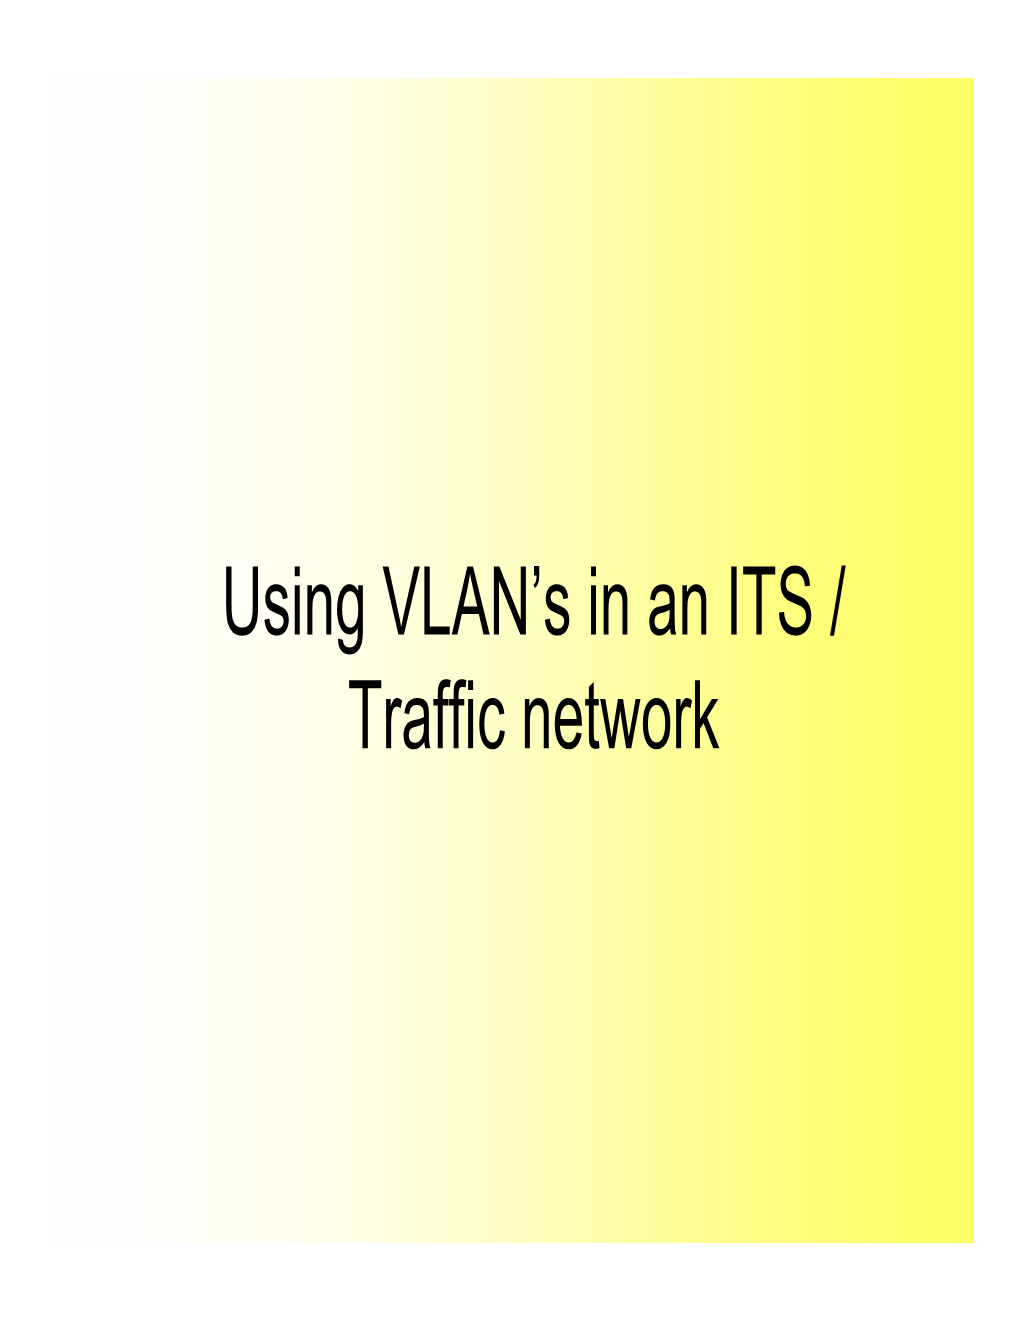 Using VLAN's in an ITS / Traffic Network